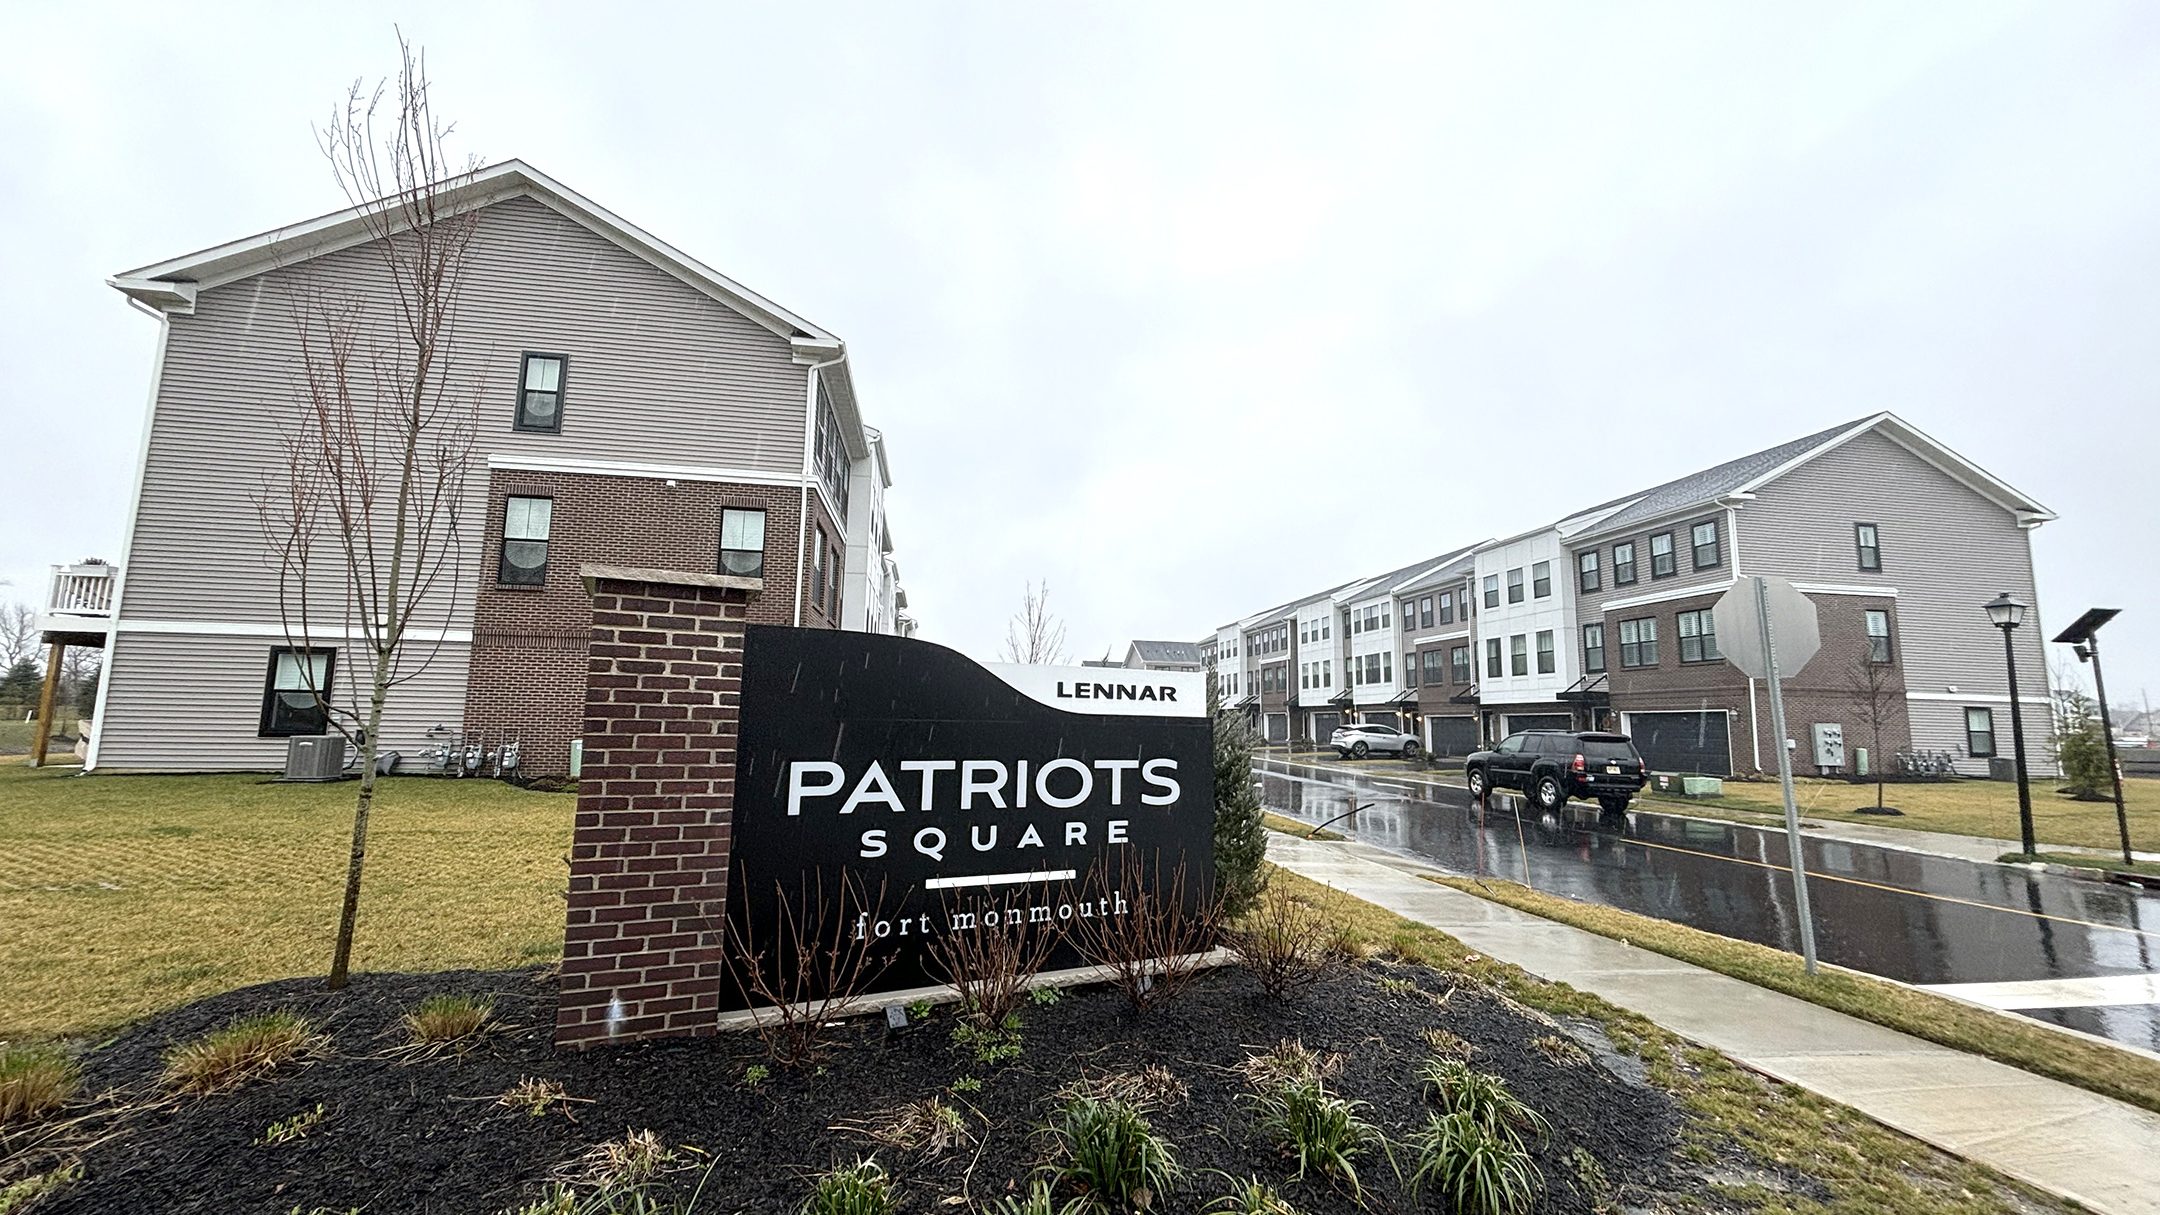 Patriots Square is one development that contributes affordable housing units to Tinton Falls. Stephen Appezzato